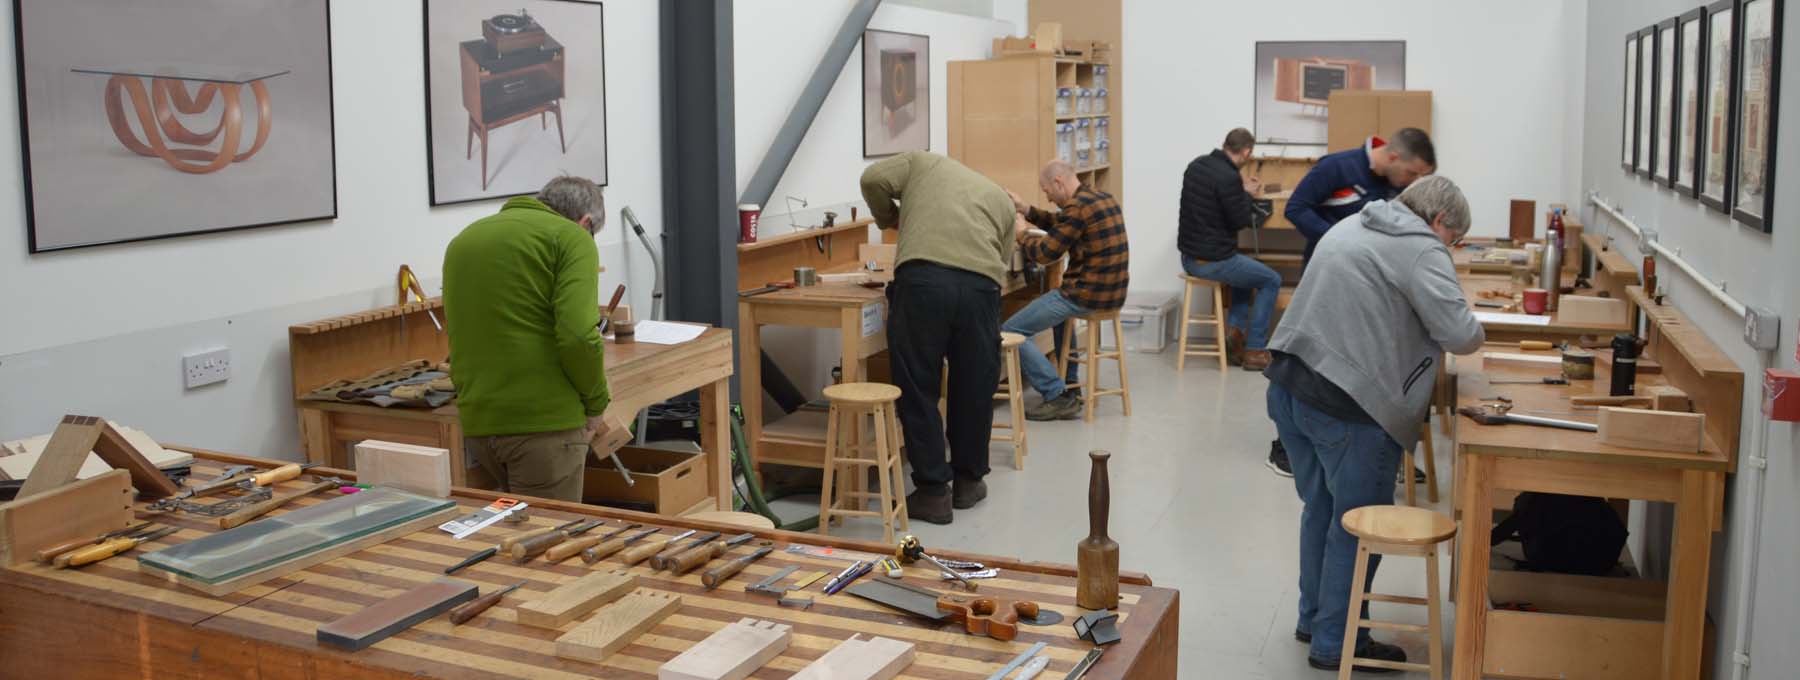 One Week Taster woodworking course at Robinson House Studio